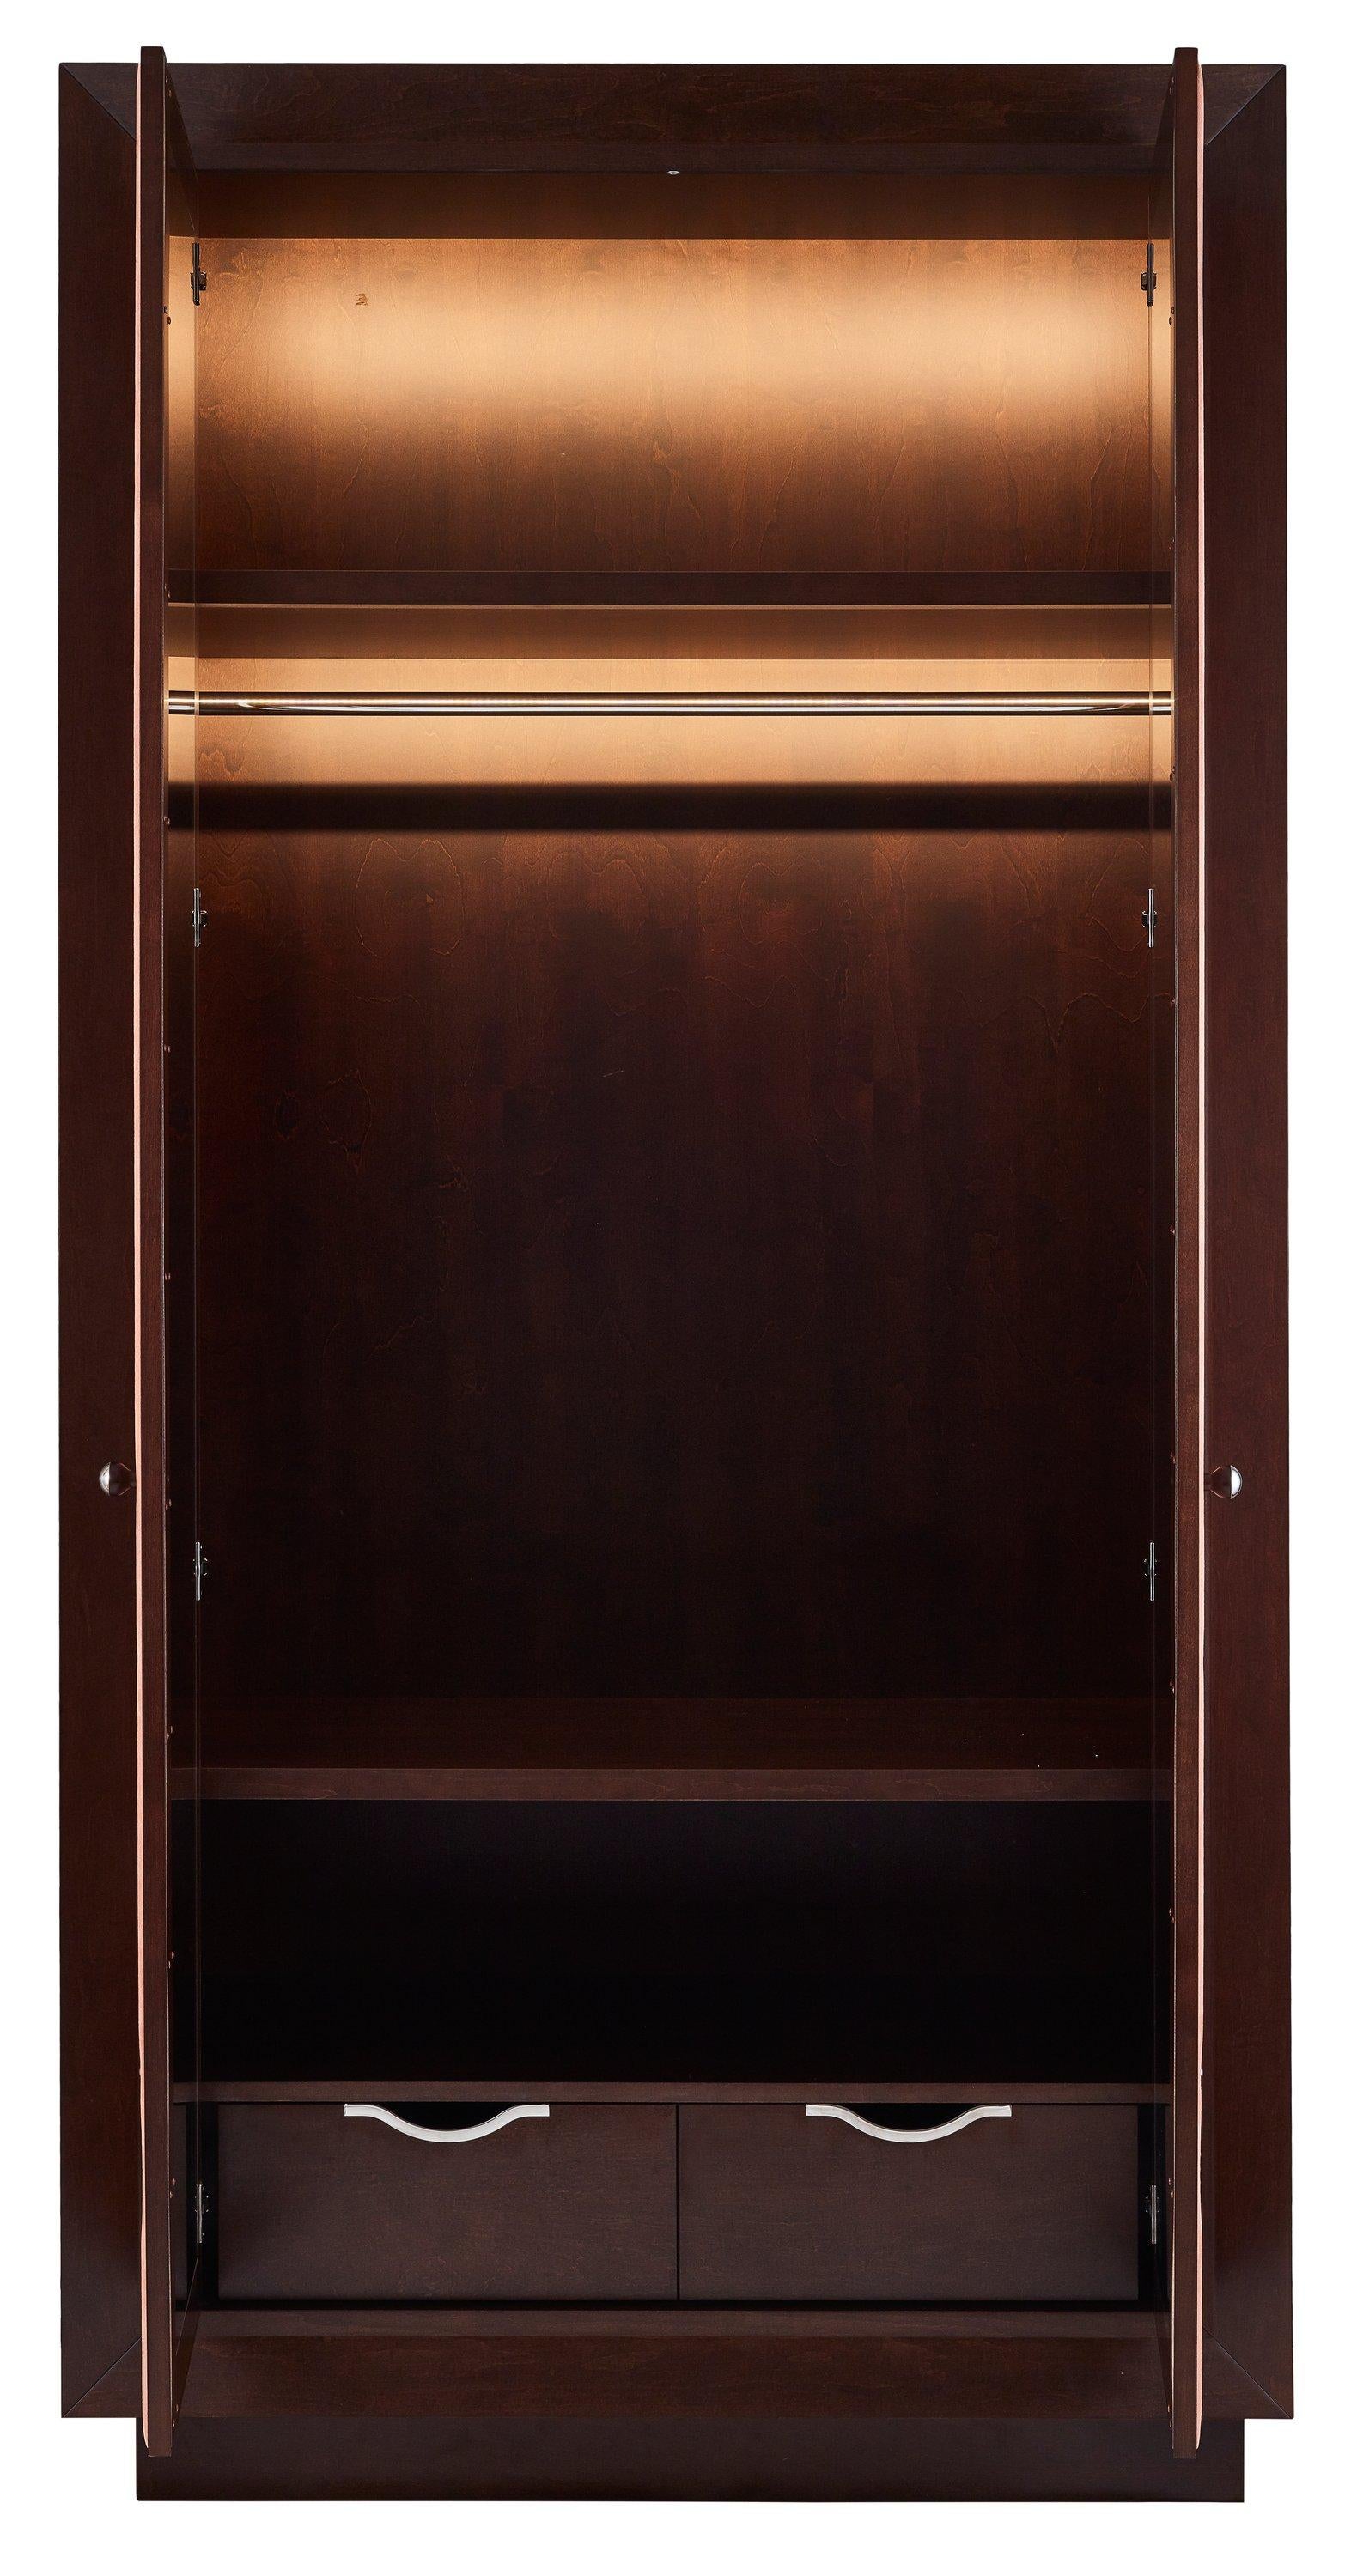 The high wardrobe is finished in fine tinted sycamore veneer and salmon Alcantara on door panels. The panels are decorated with the pattern of chrome-plated studs. The fern-like poetic pattern brings here the magic of enchanted forests.
The